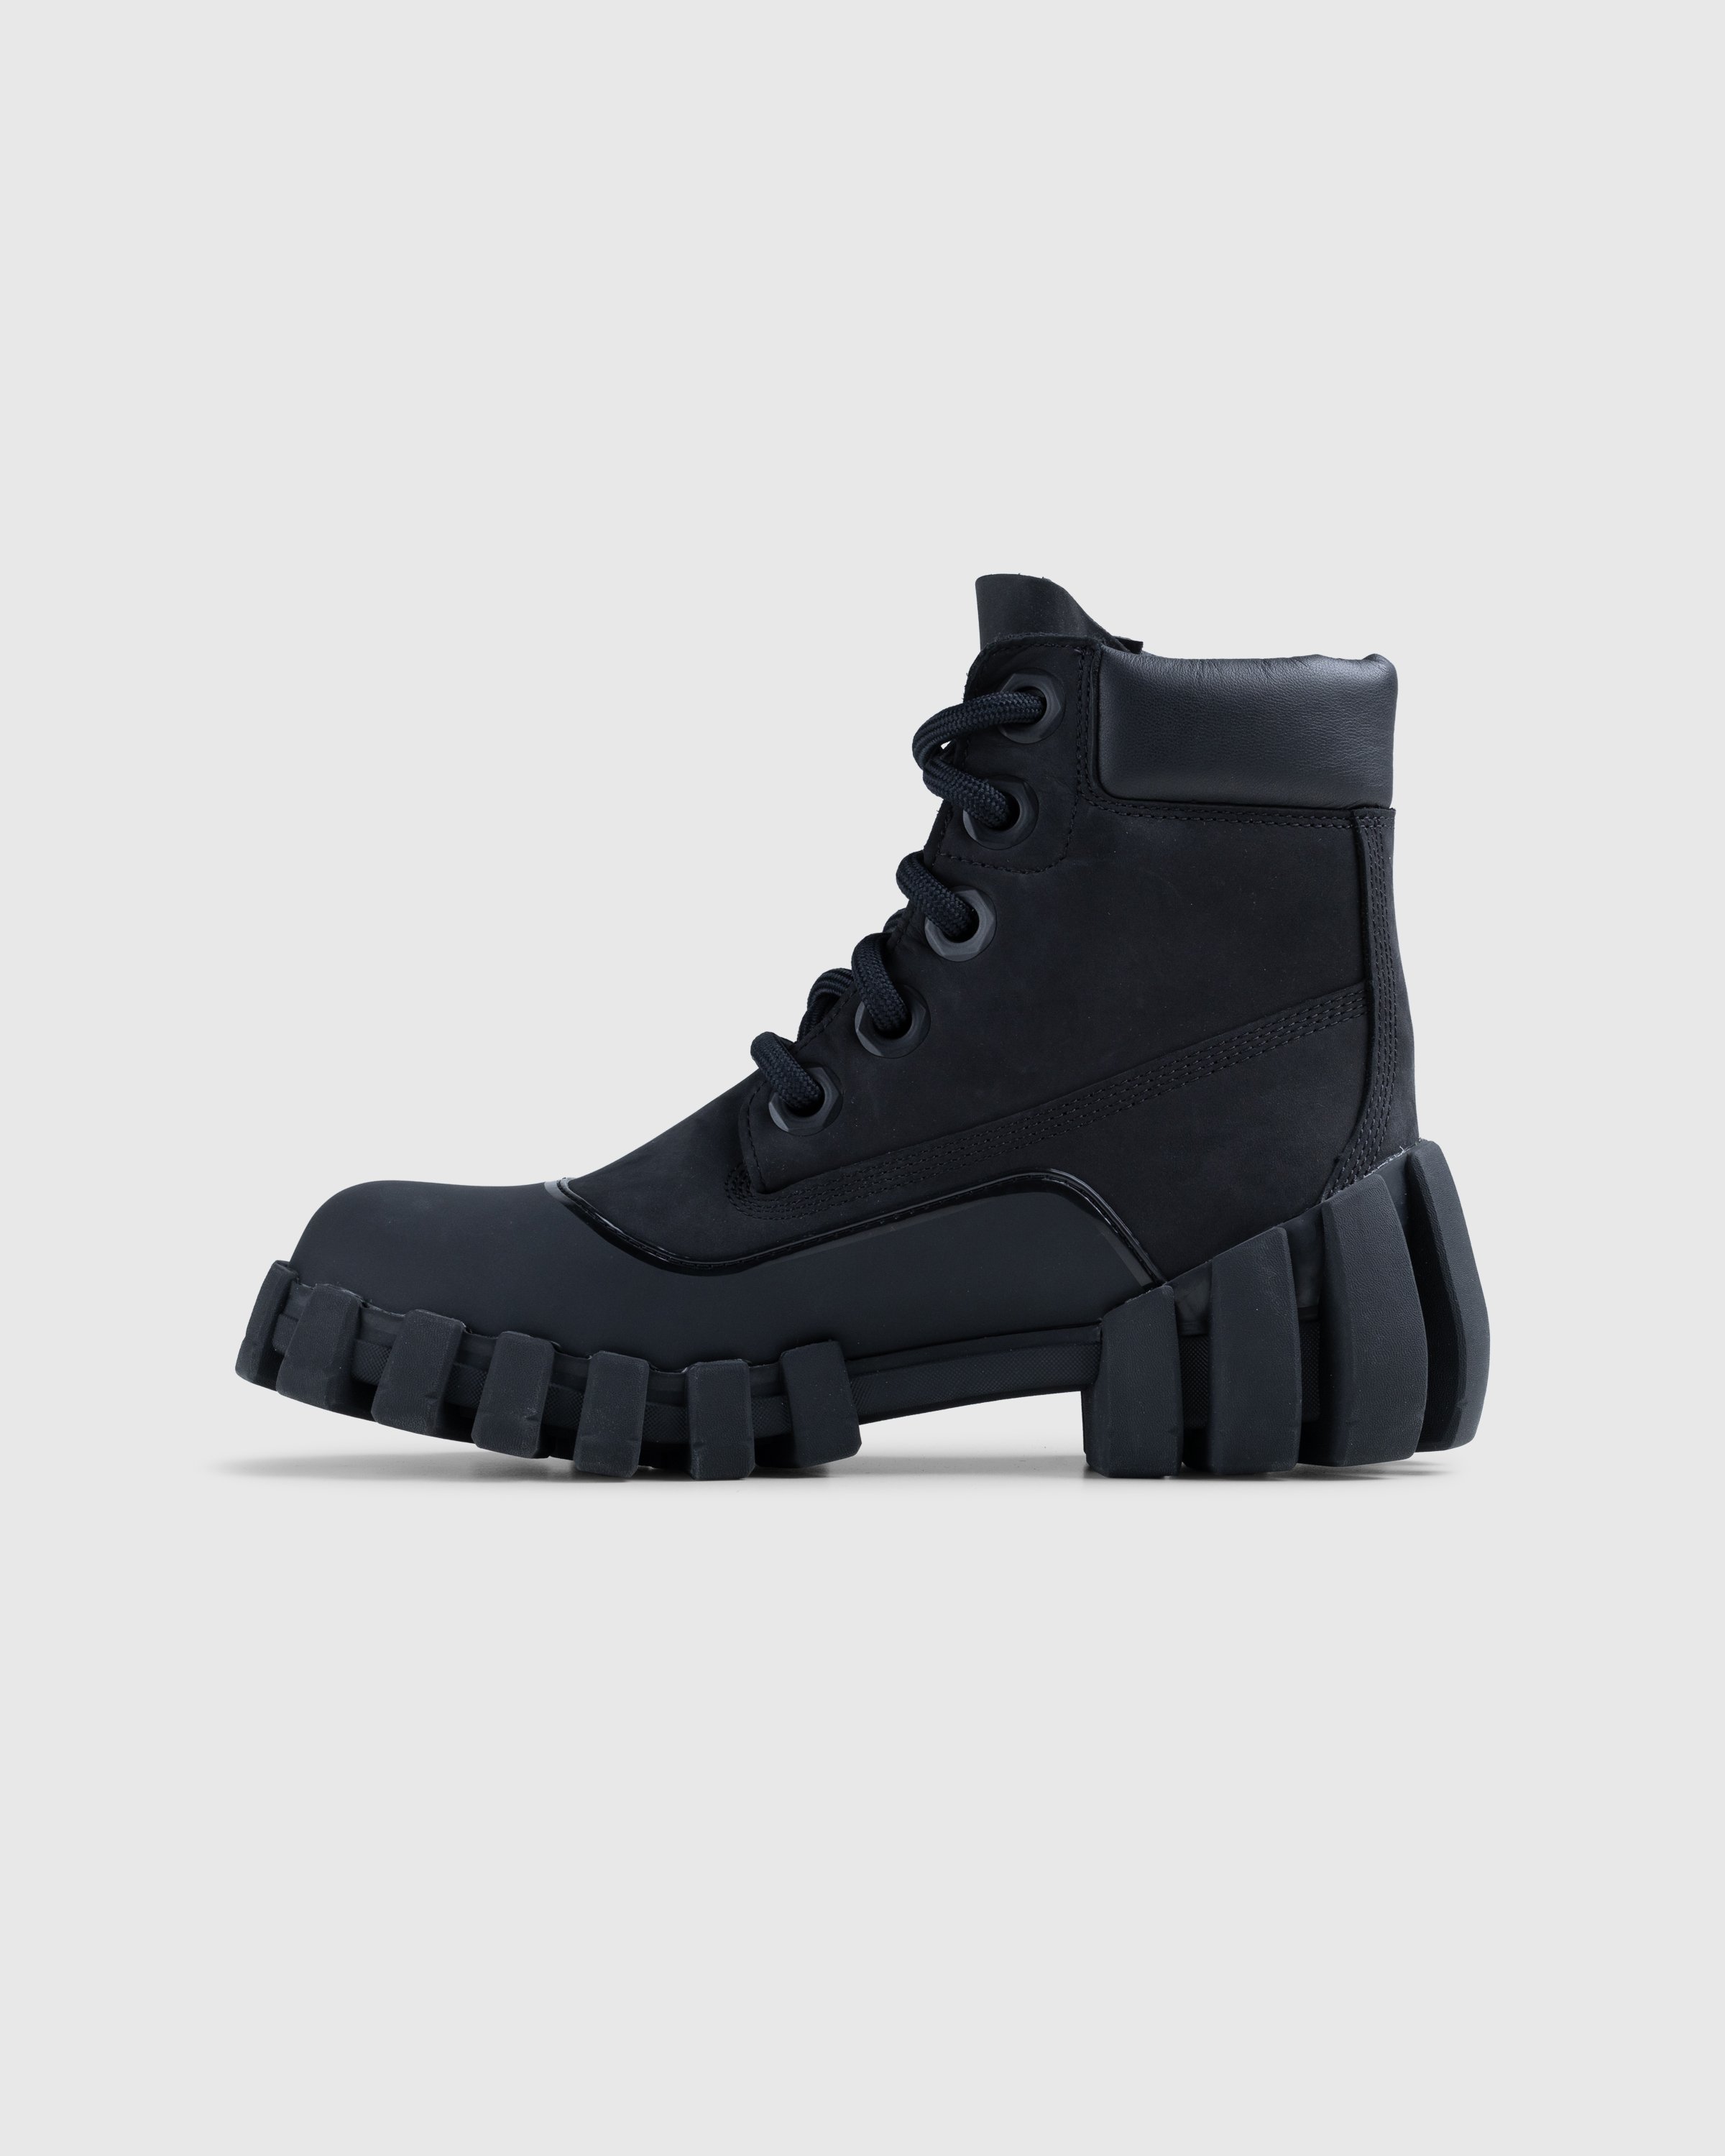 Timberland x Humberto Leon - 6 INCH LACE UP BOOT BLACK - Footwear - Black - Image 2